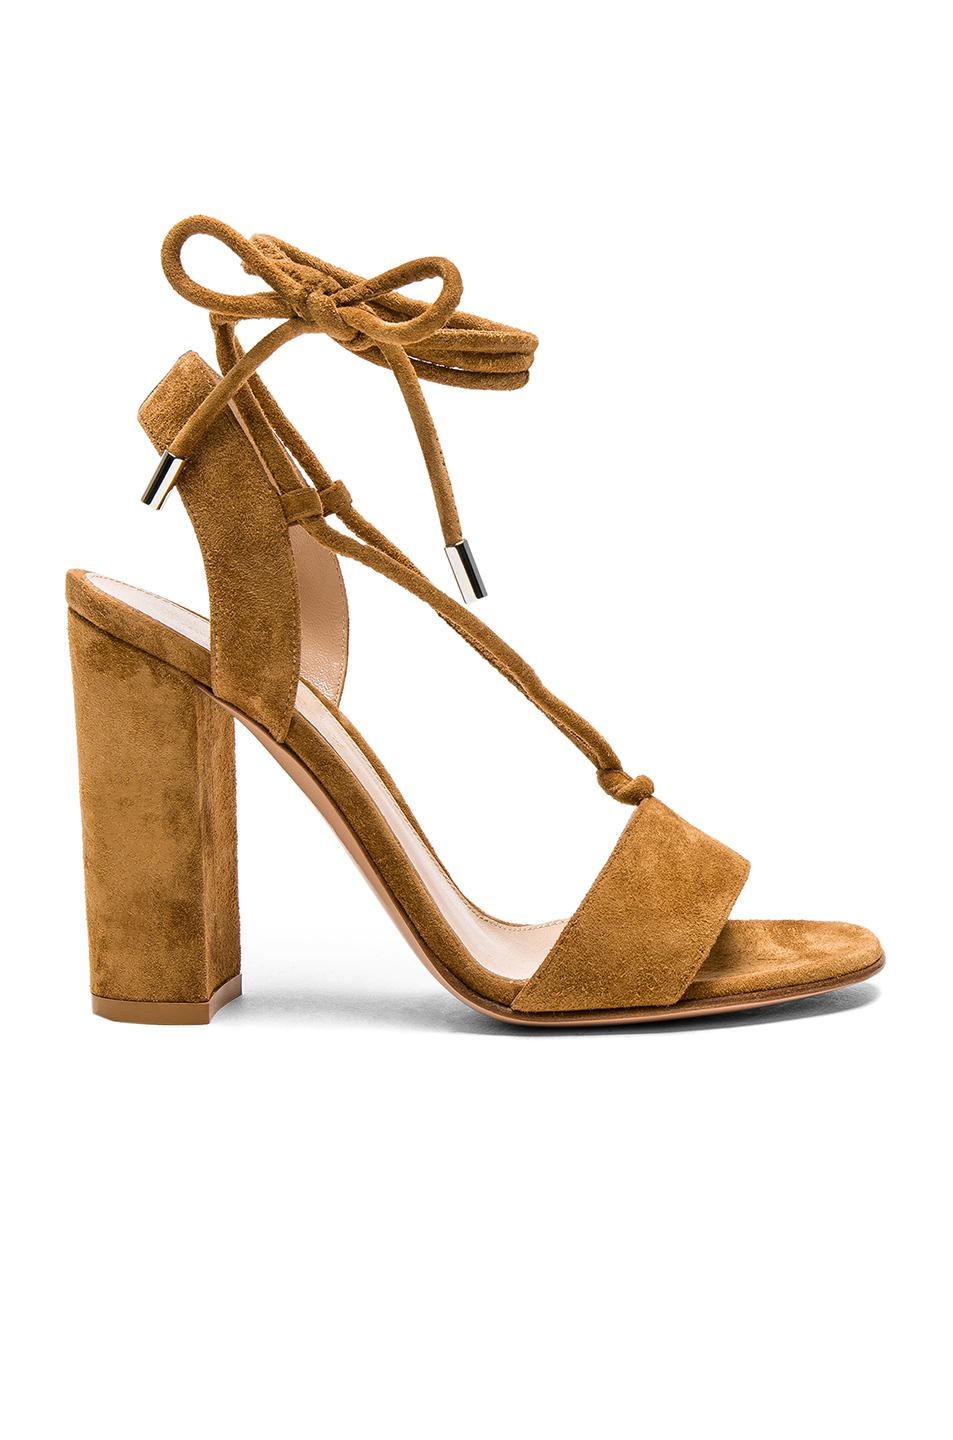 Lyst - Gianvito Rossi Suede Lace Up Heels in Brown